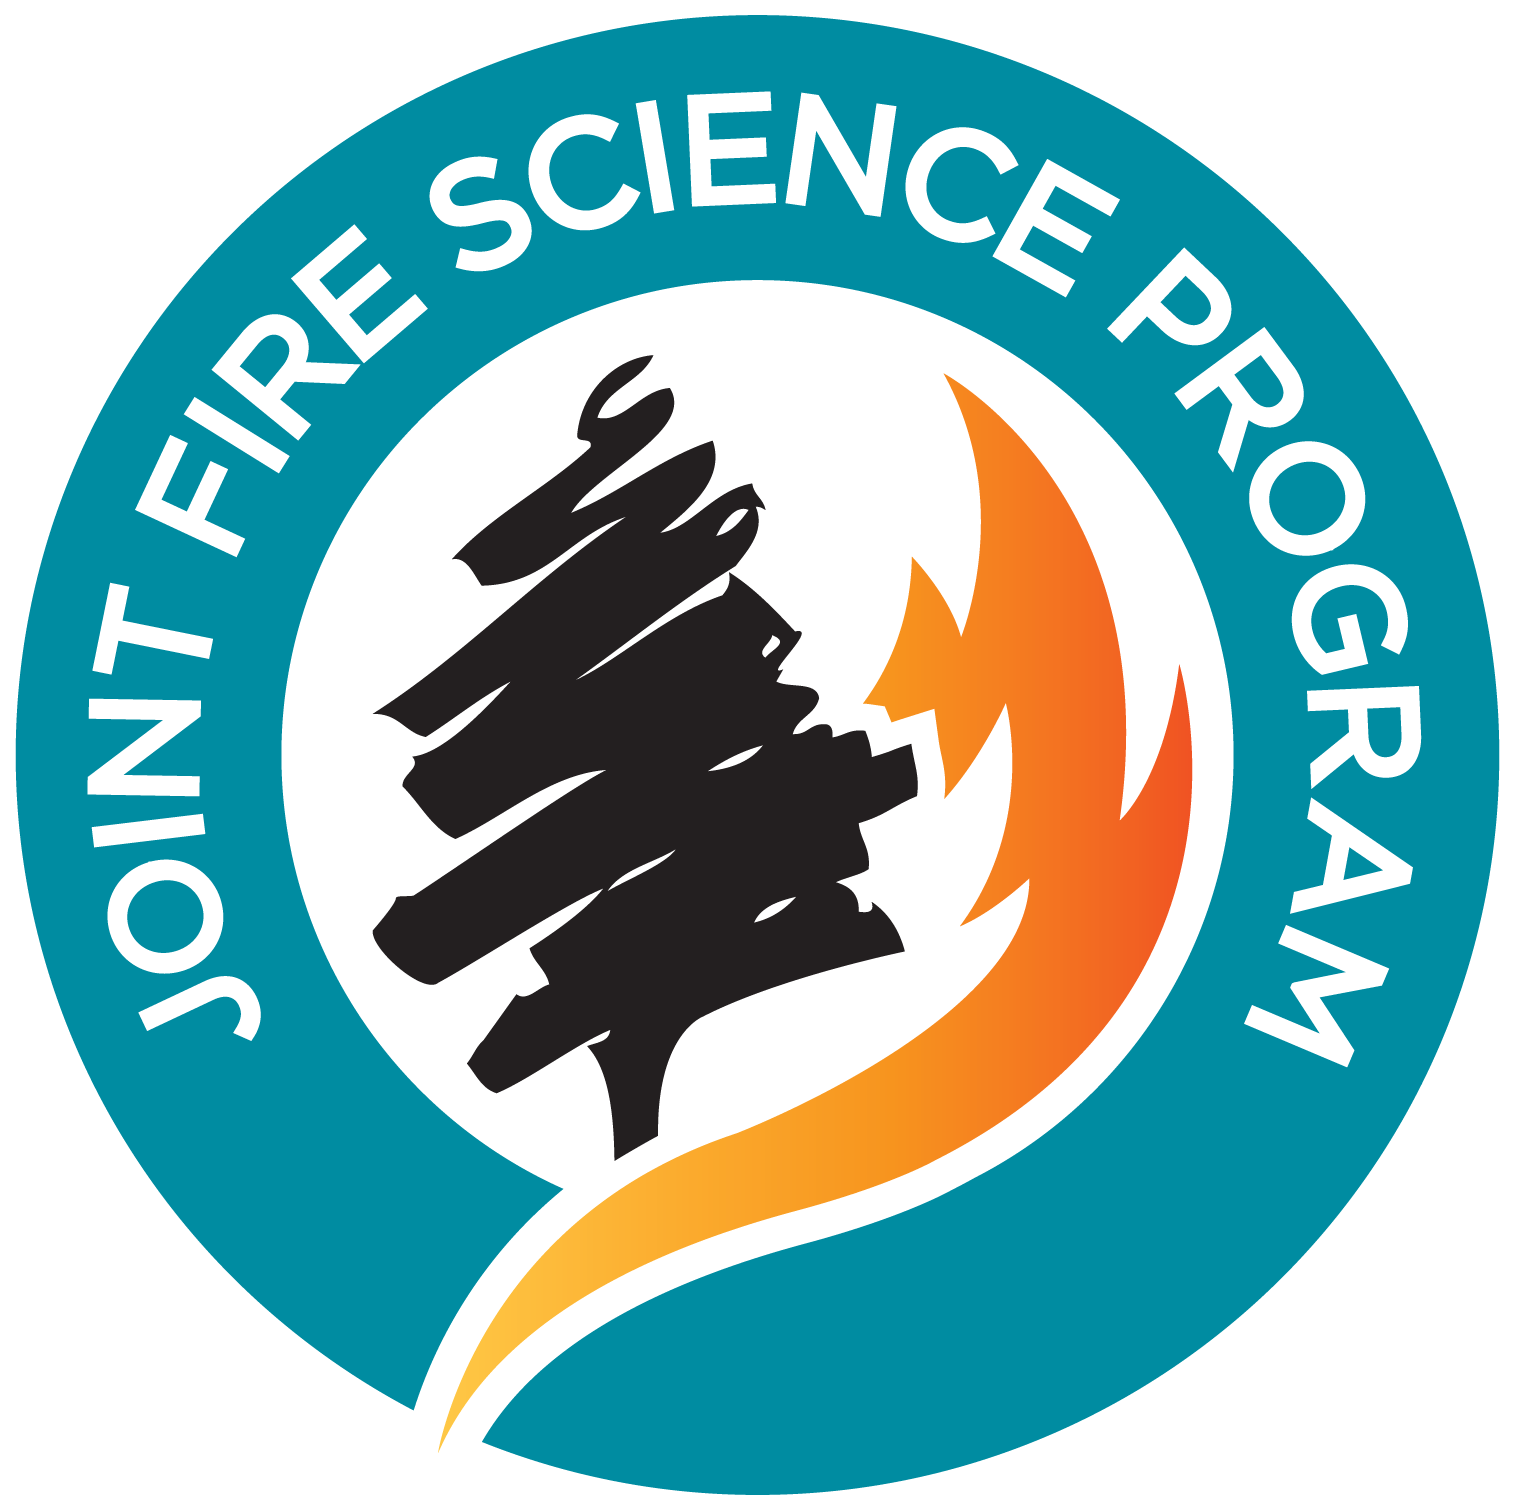 Joint Fire Science logo.